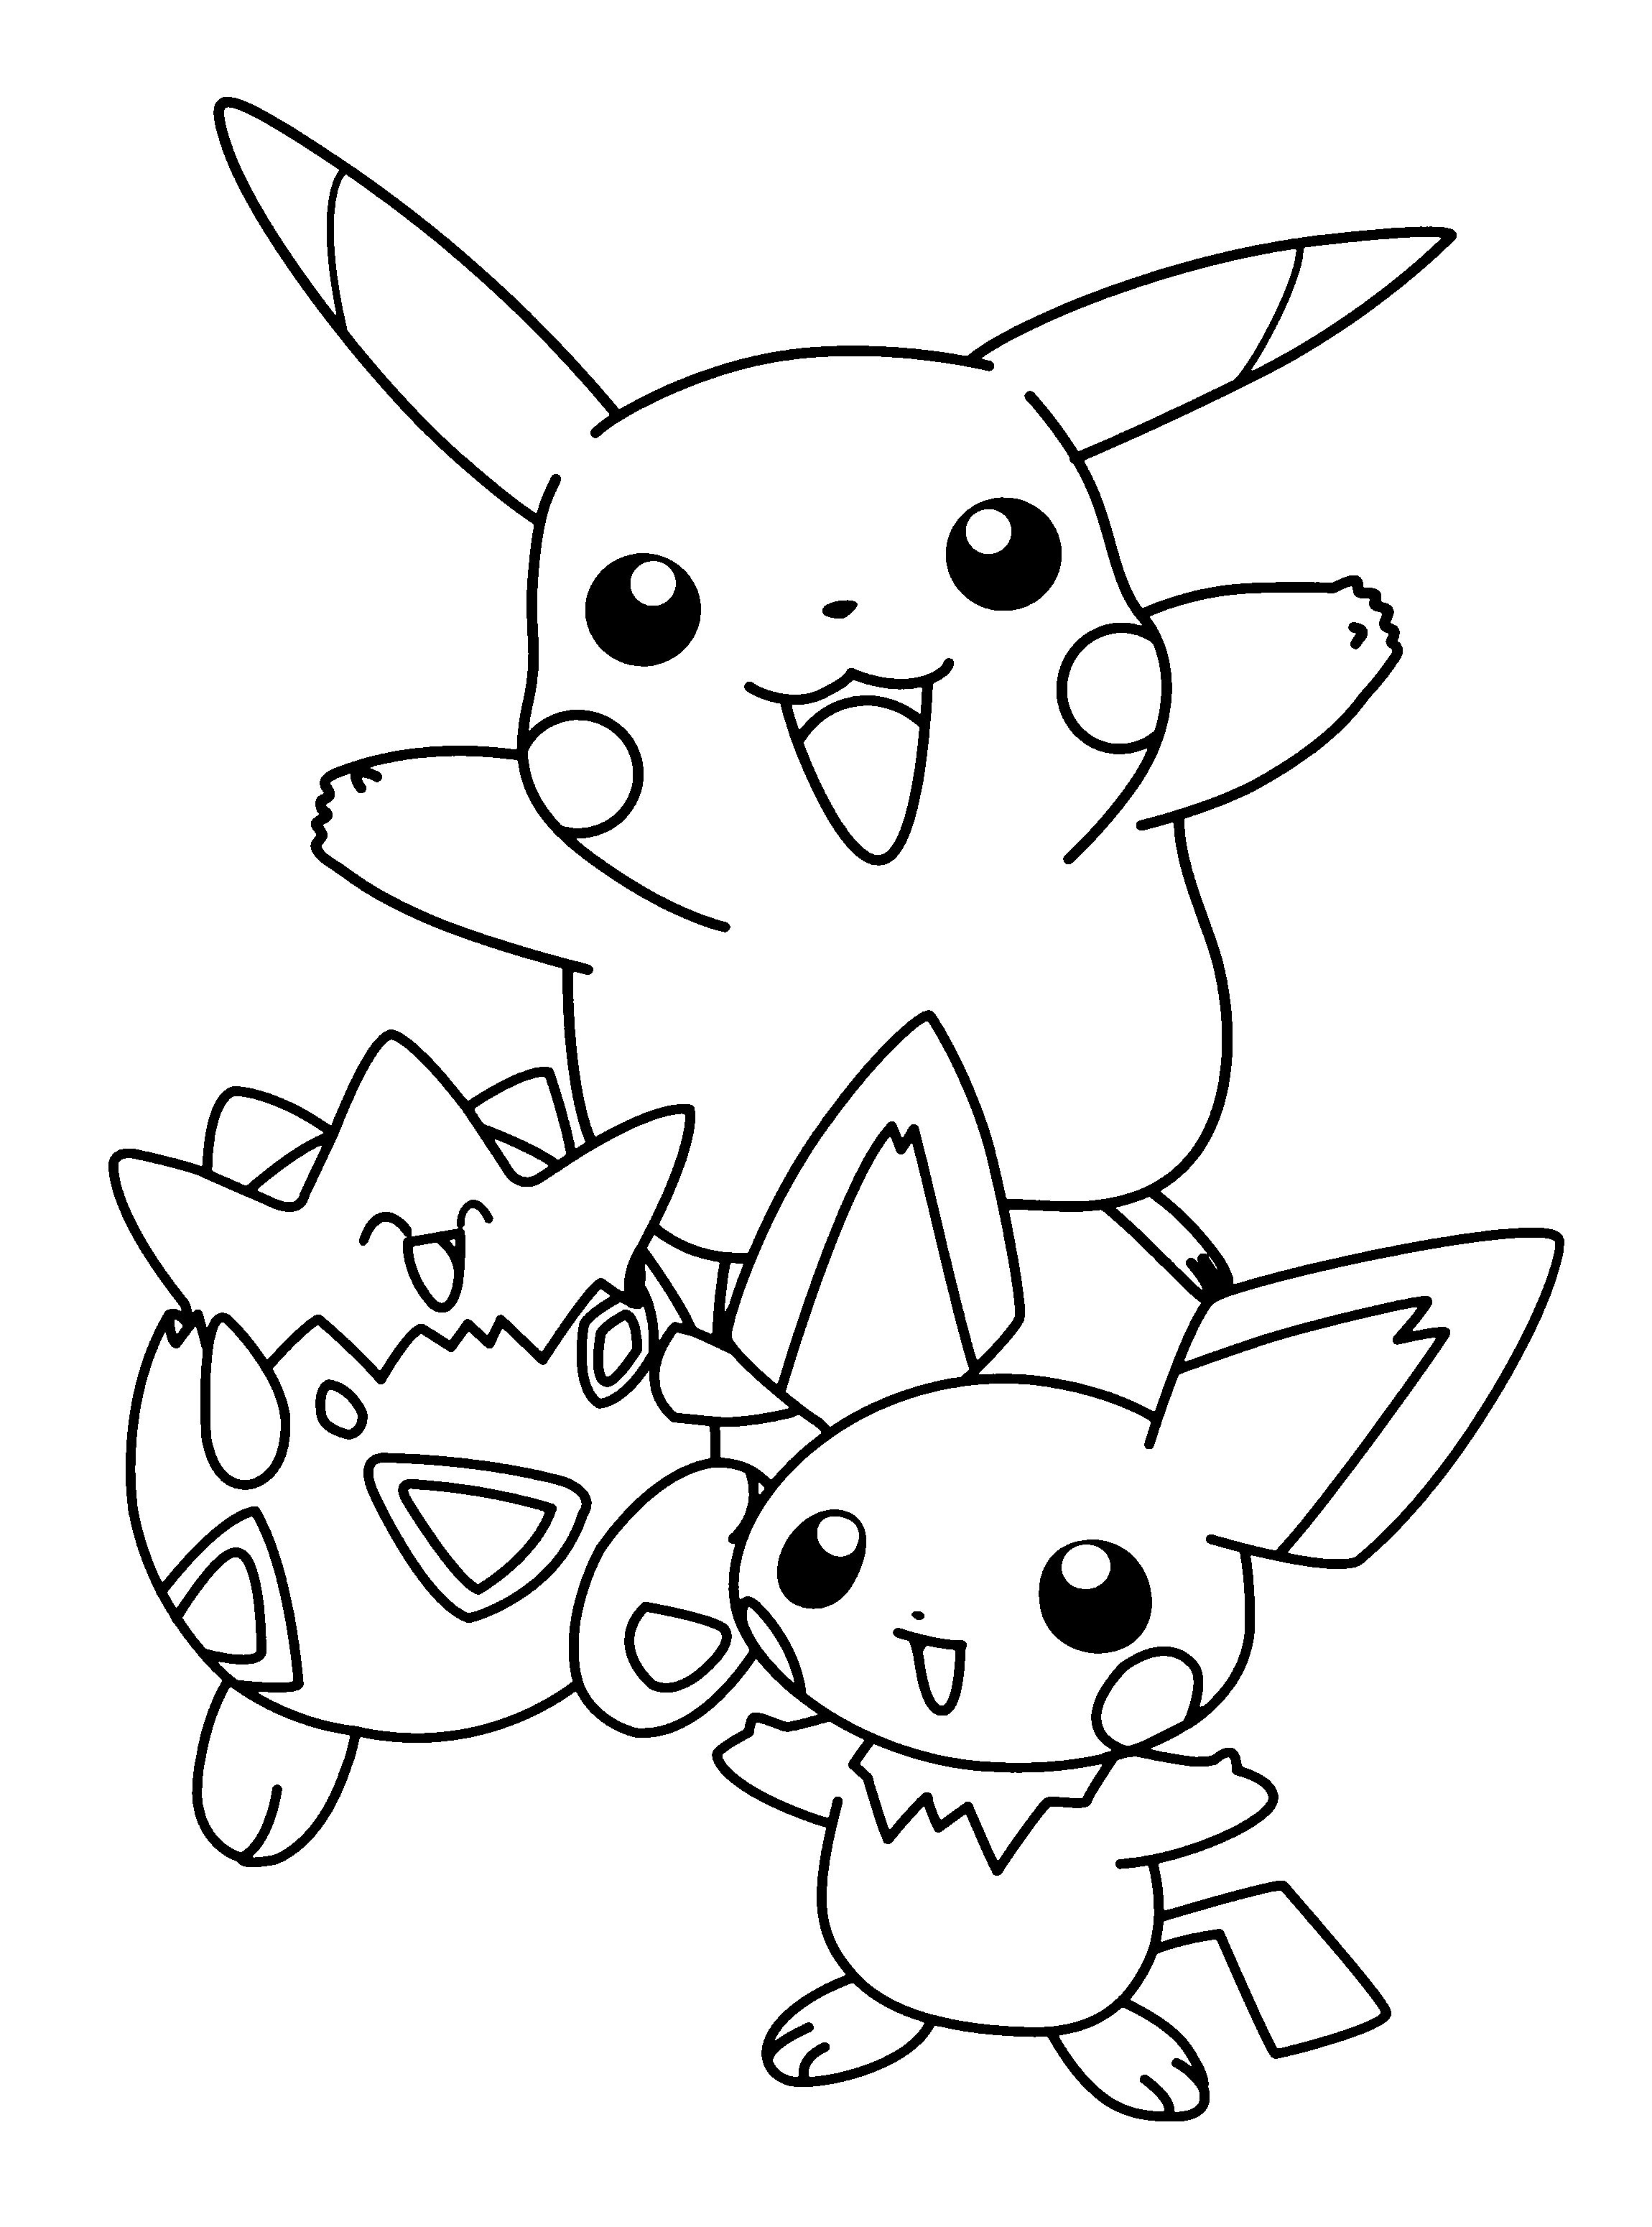 Limited Vaporeon Pokemon Coloring Pages Free Download Http Procoloring